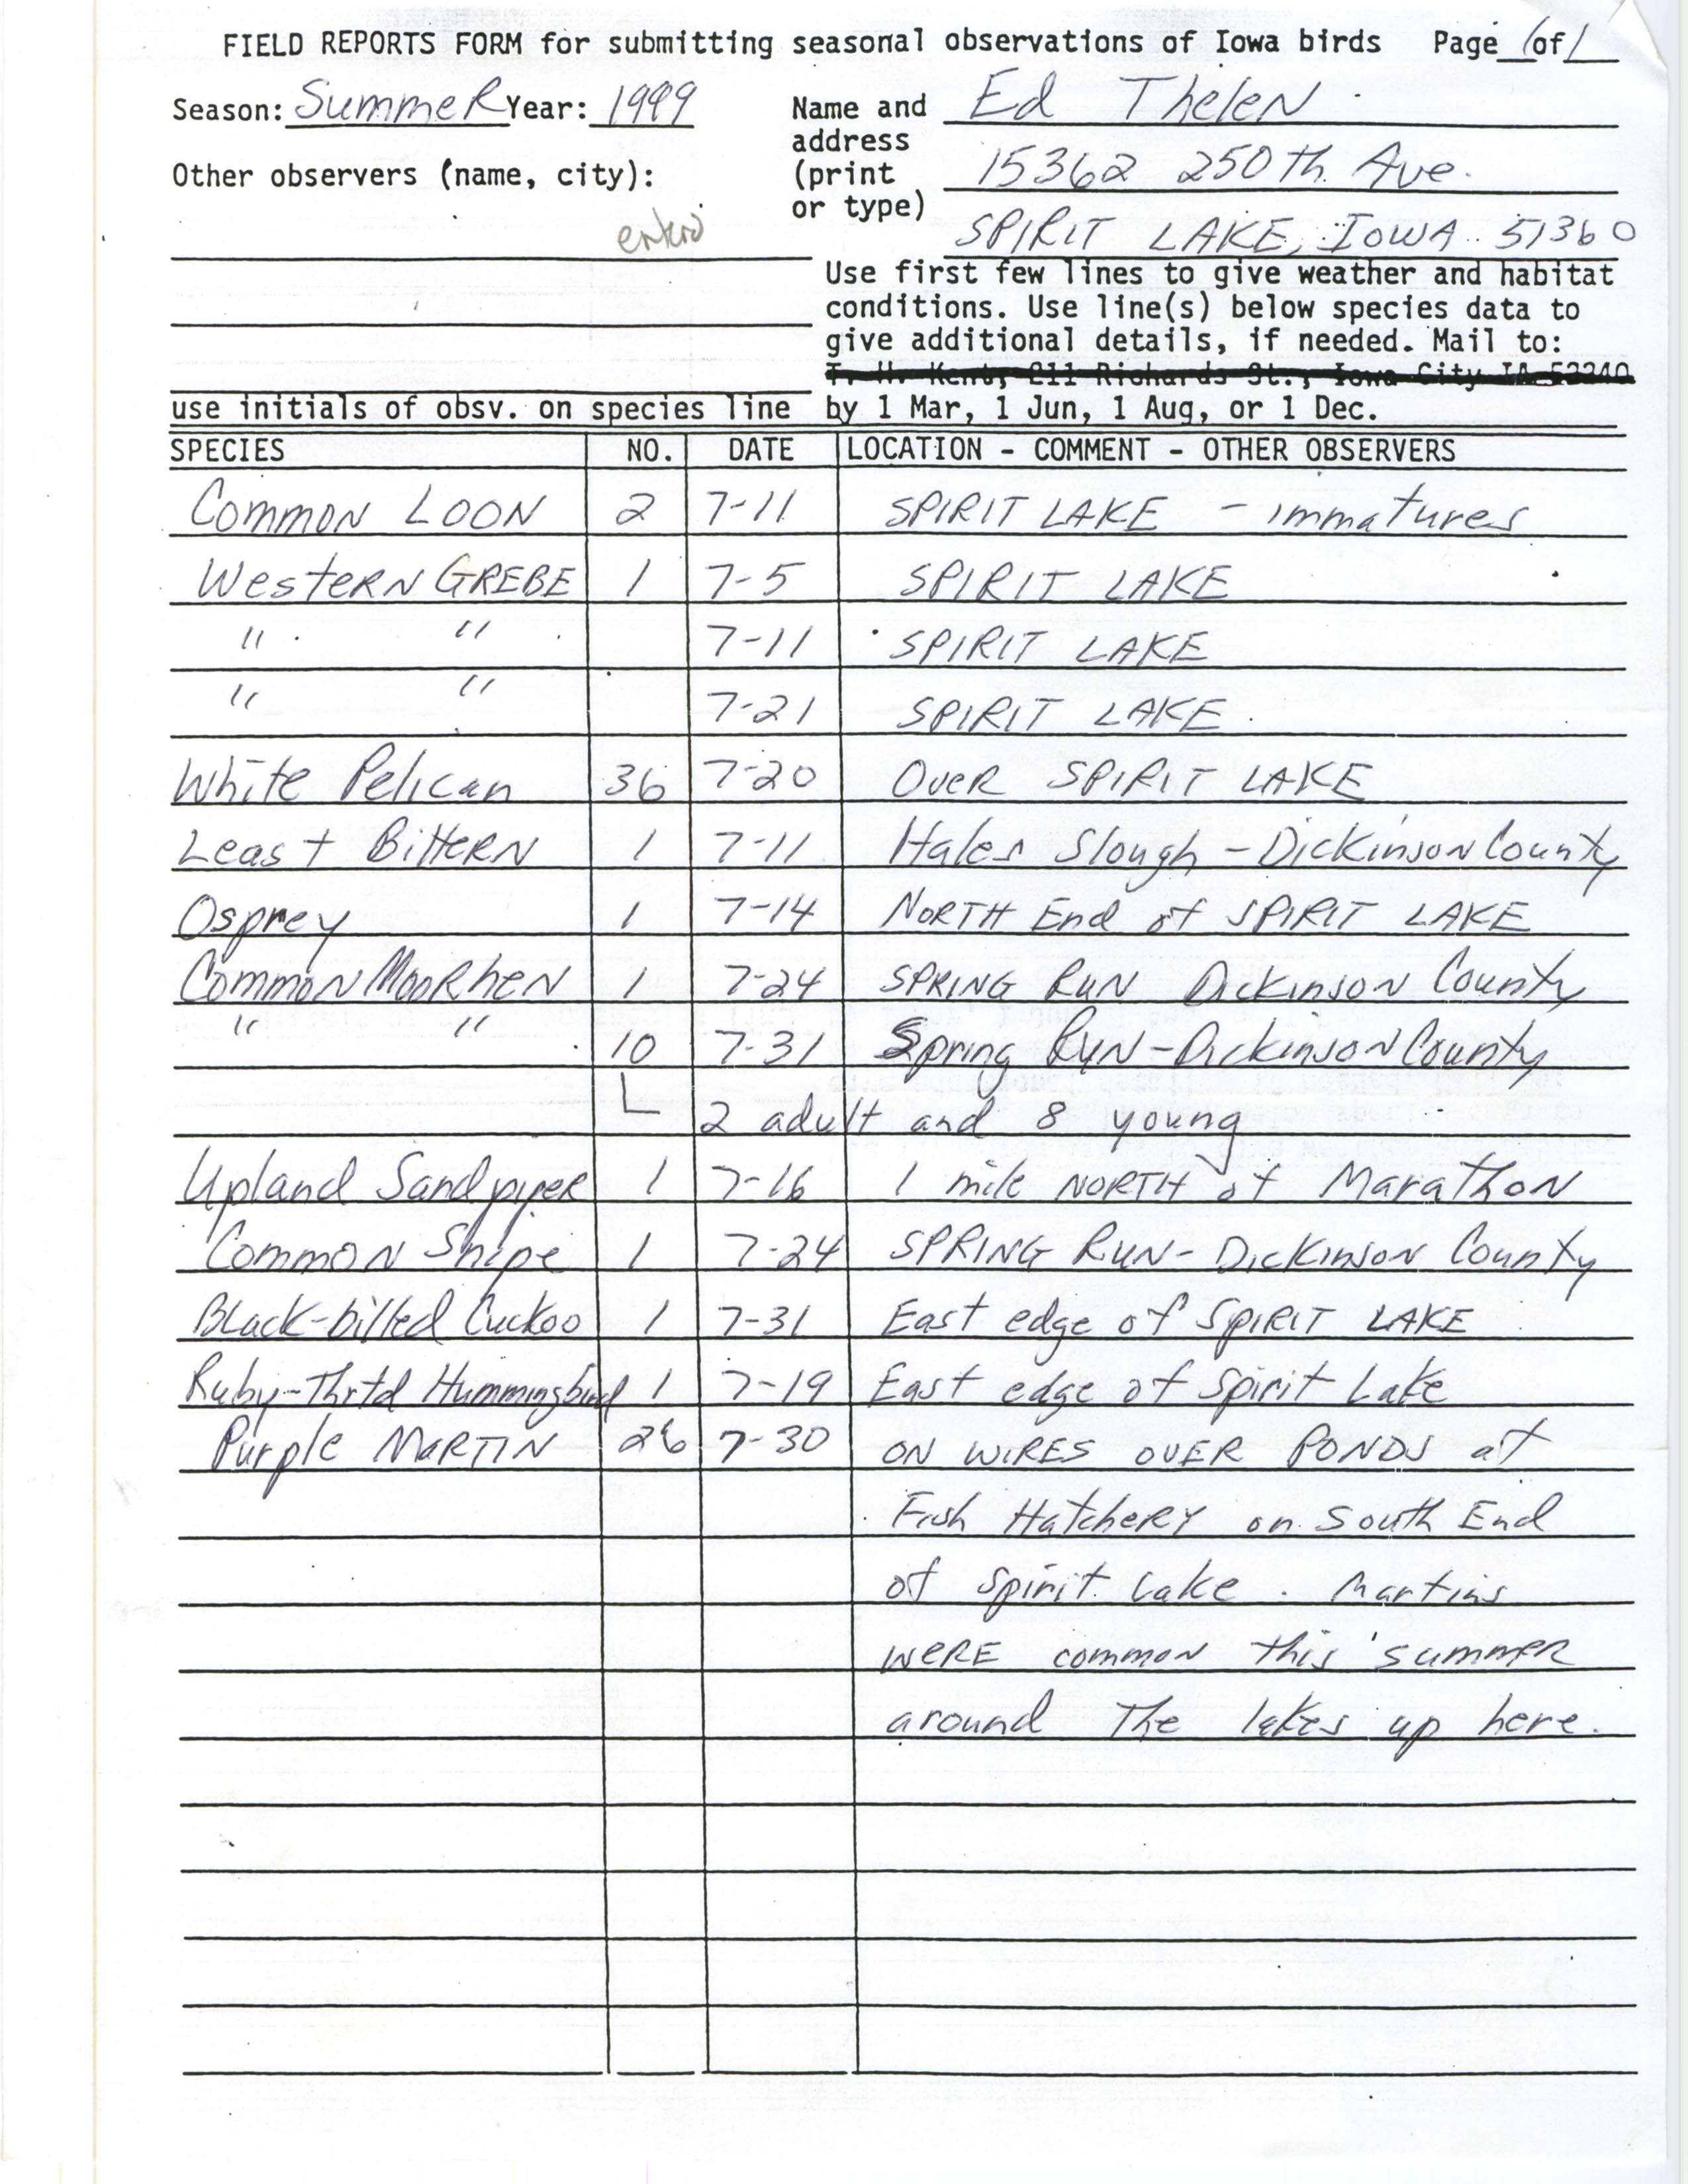 Field reports form for submitting seasonal observations of Iowa birds, summer 1999, Ed Thelen